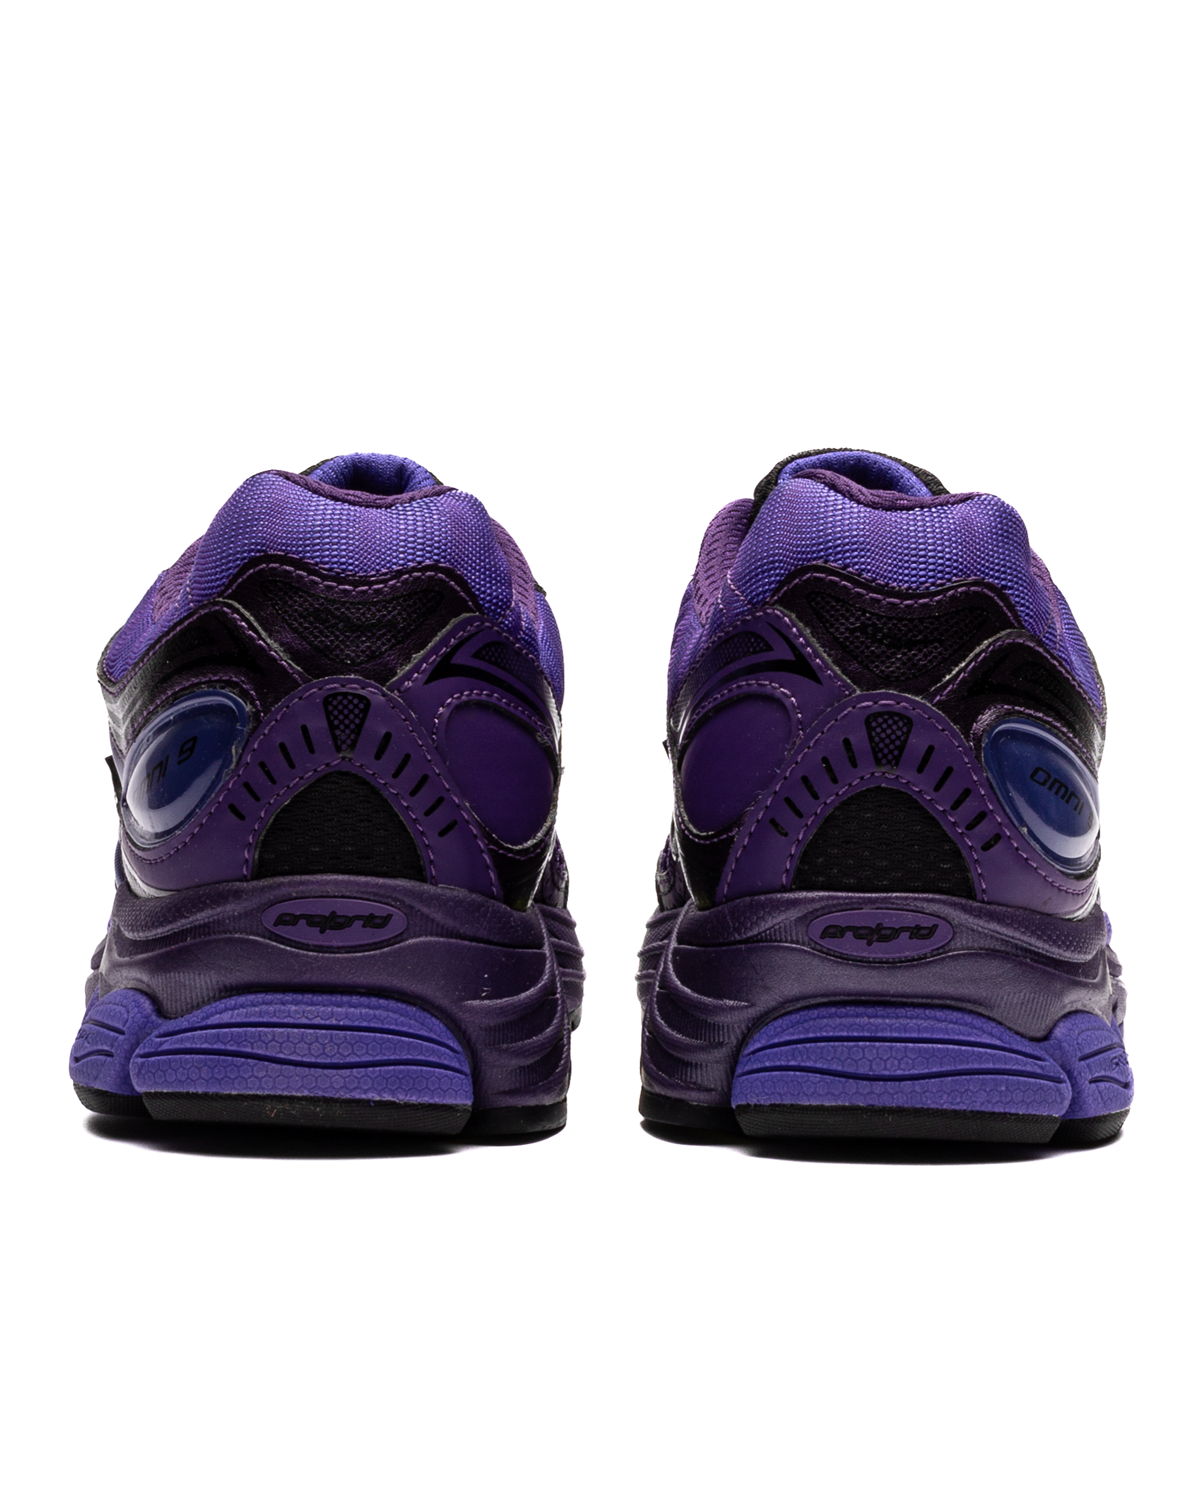 Progrid Omni 9 'Party Pack' Purple